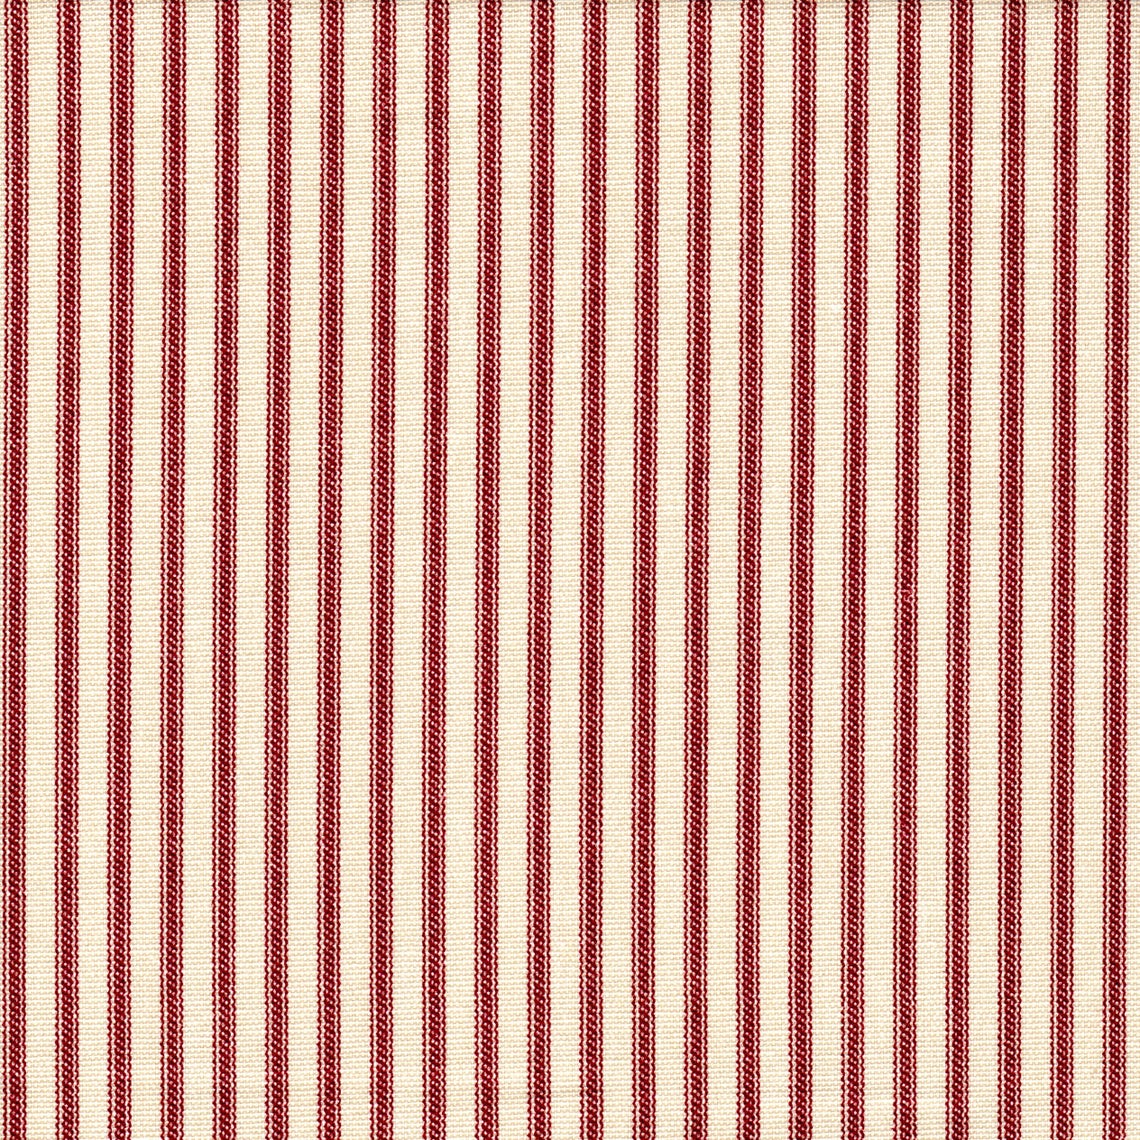 shower curtain in farmhouse red traditional ticking stripe on beige